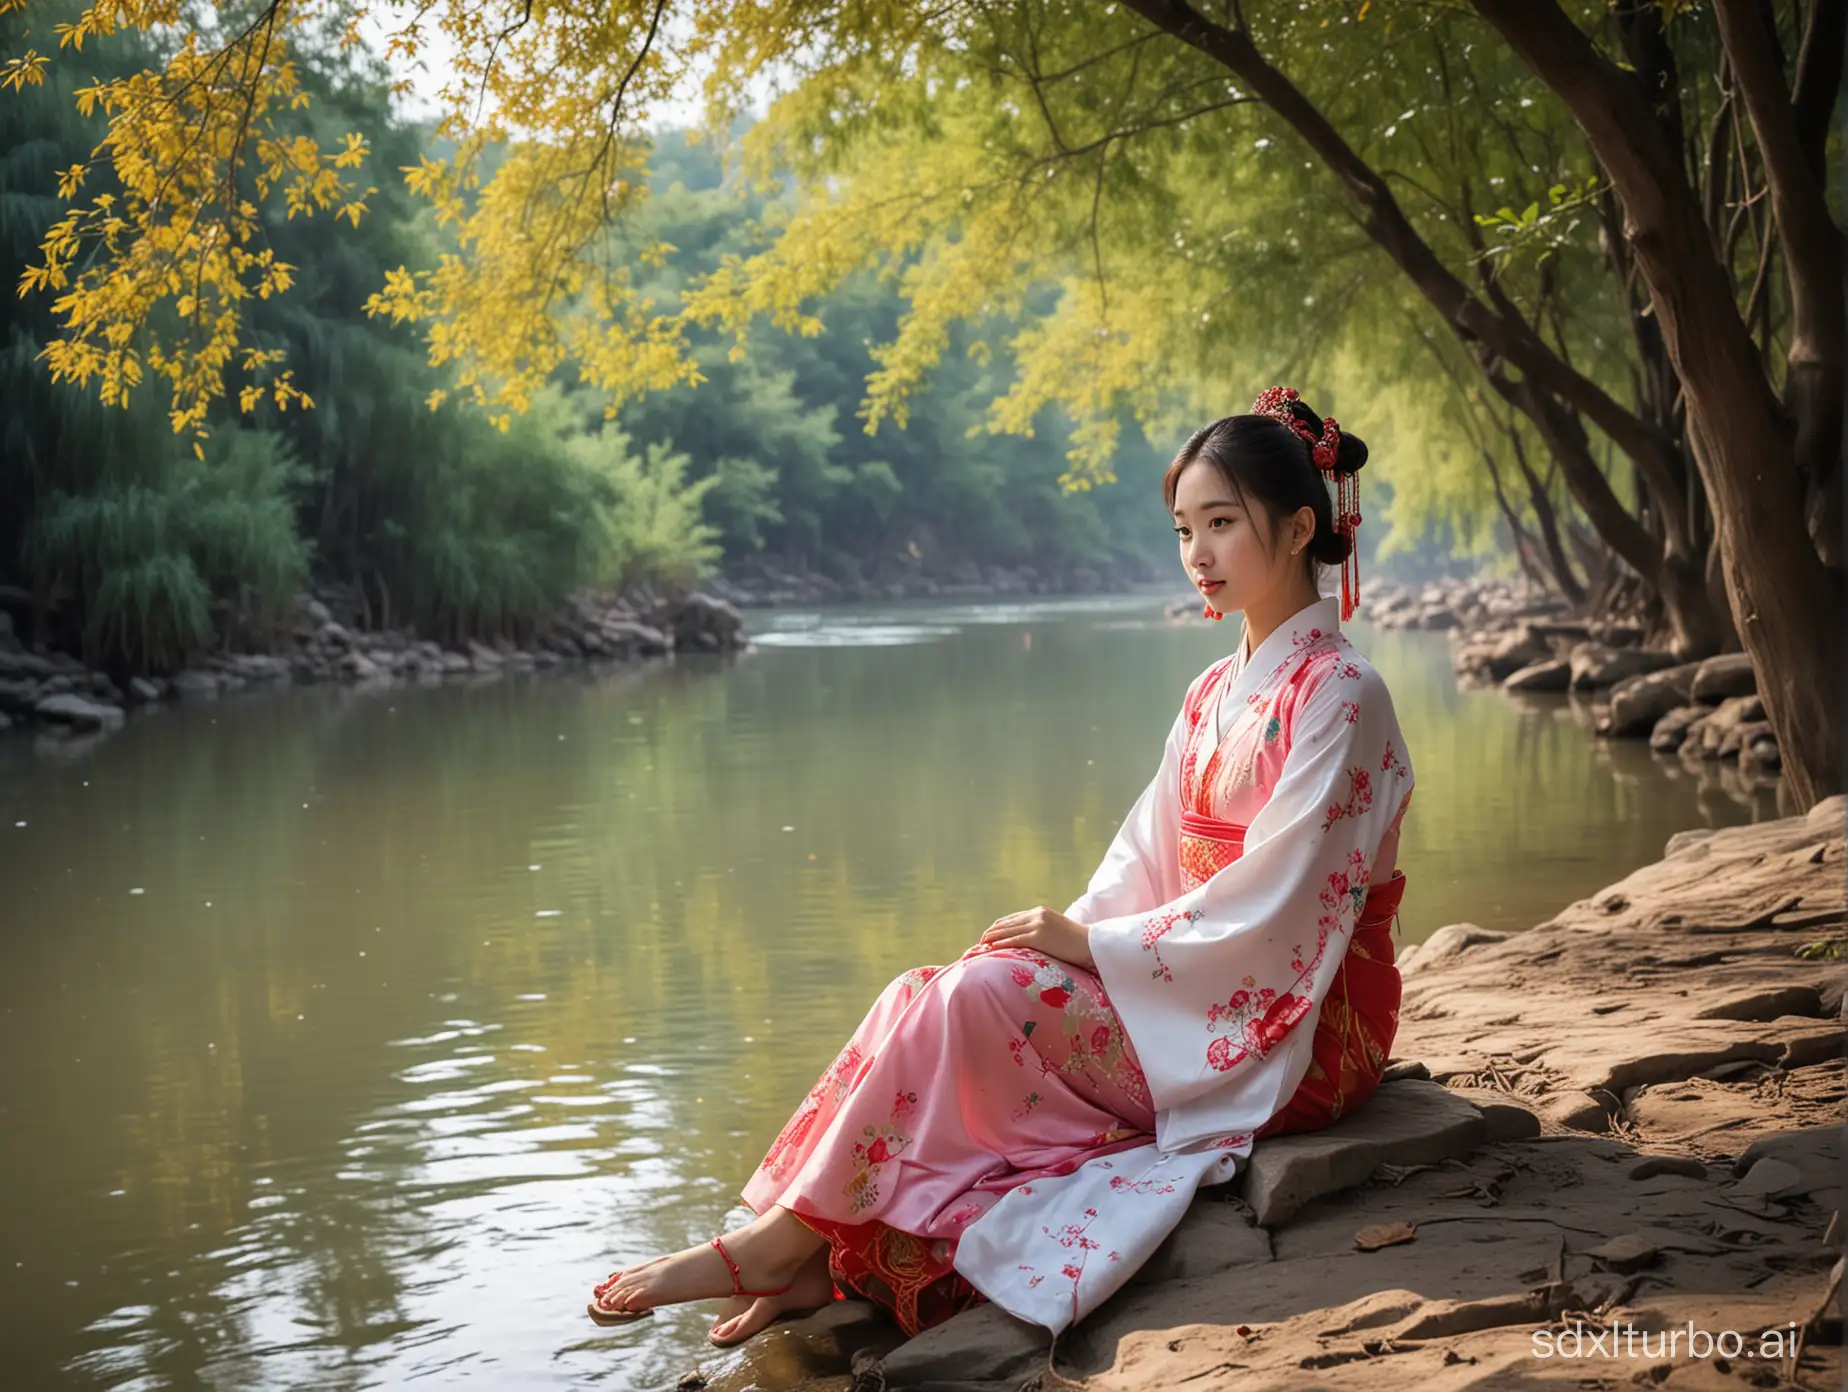 1 girl with Chinese traditional clothing sits by a river